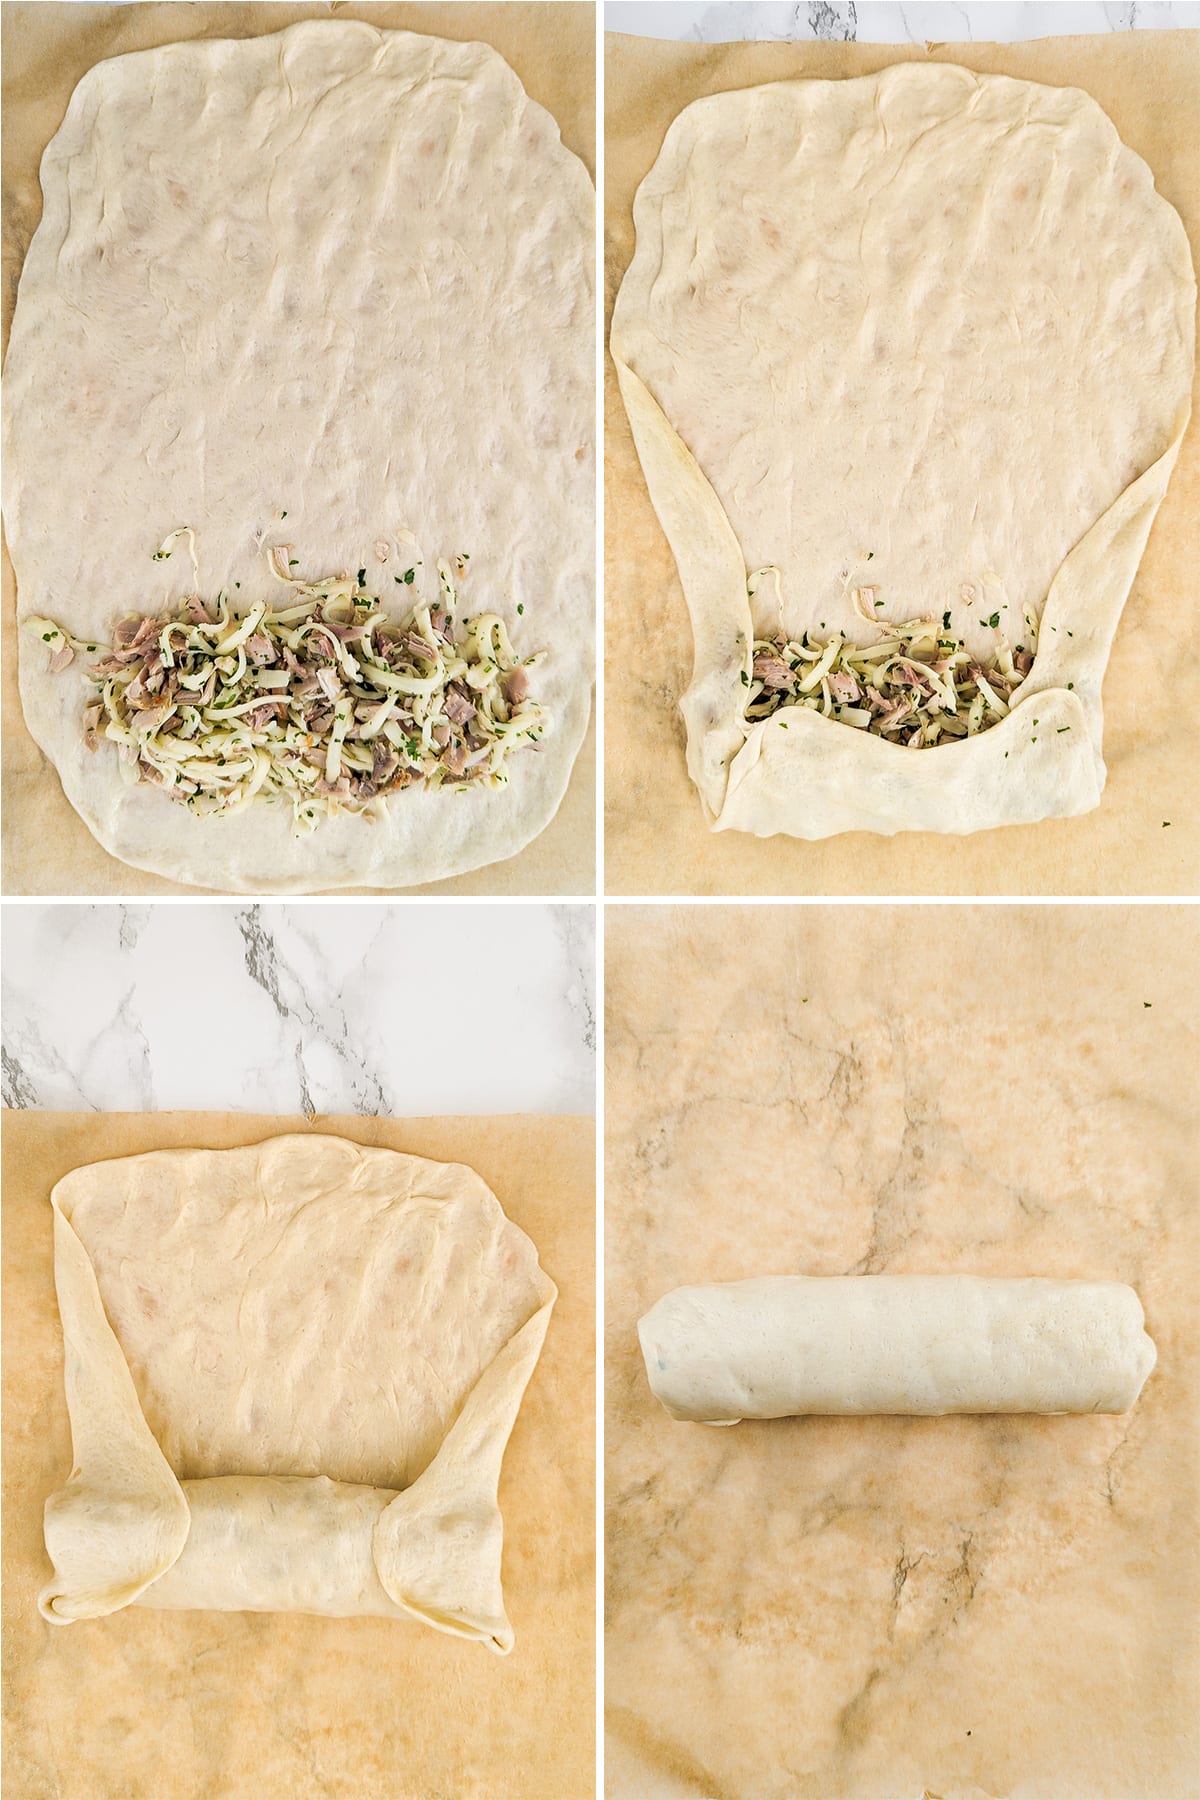 The process of rolling out the chicken bake dough with stuffing.